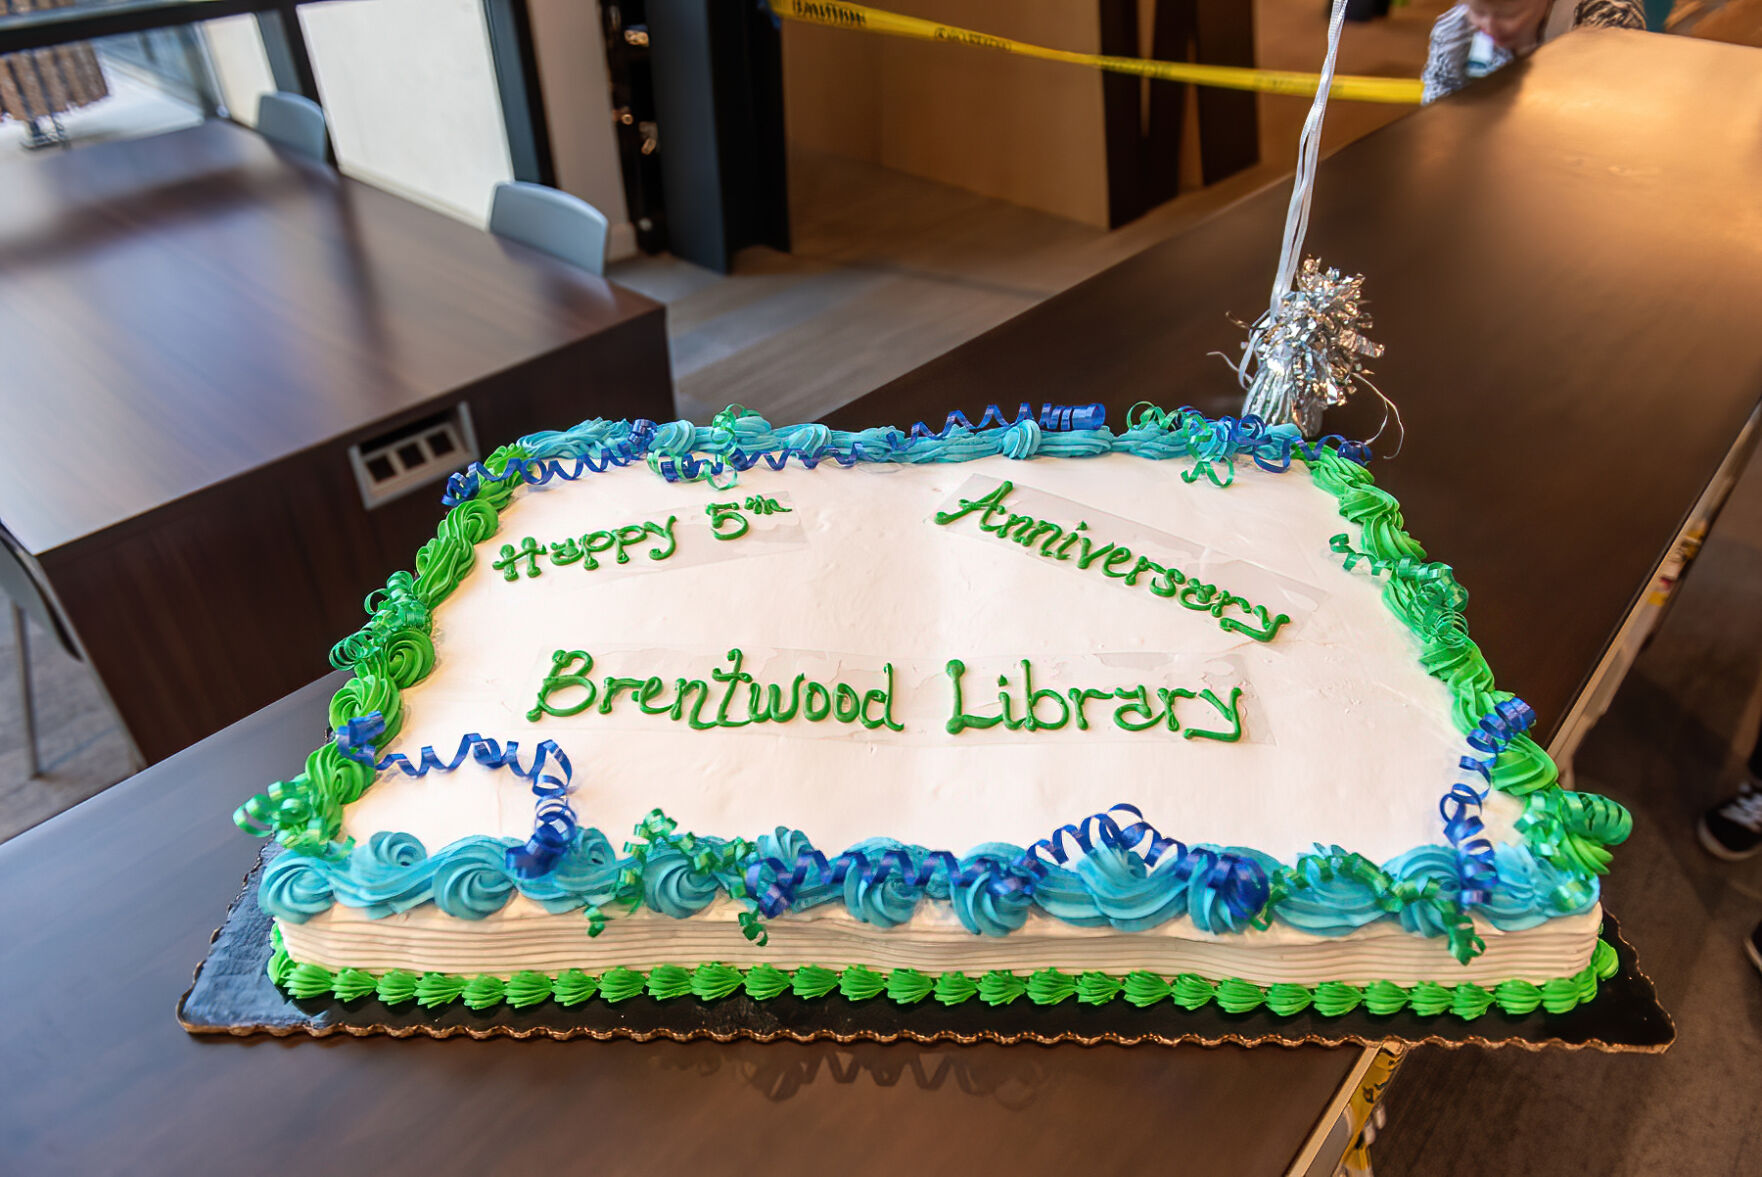 Open Book Cake for Library Author Day | A cake in the shape … | Flickr